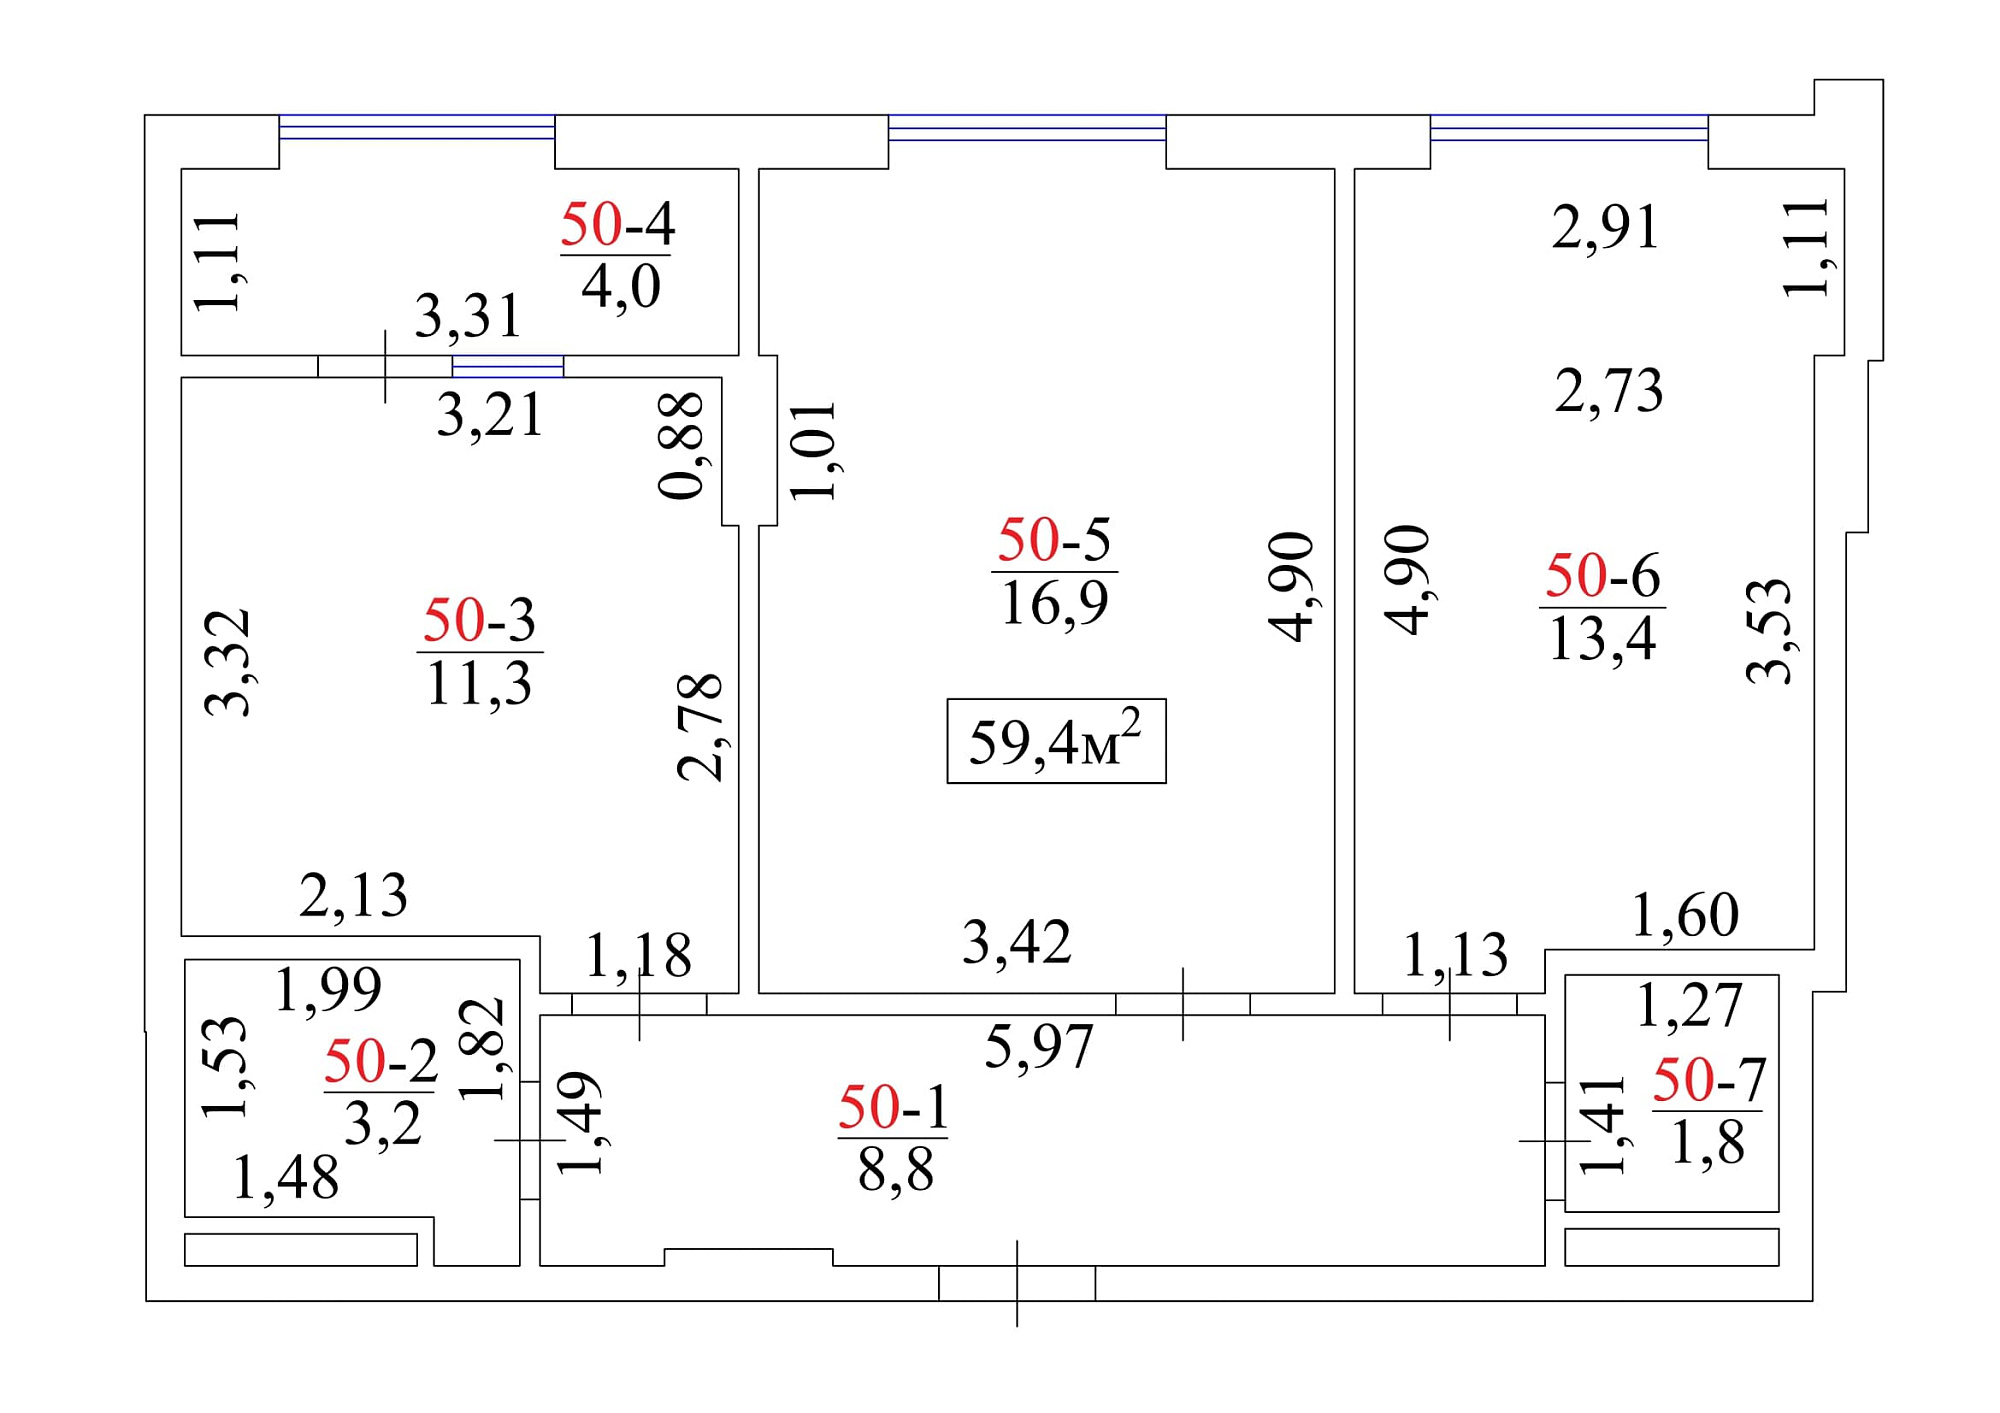 Planning 2-rm flats area 59.4m2, AB-01-06/00048.